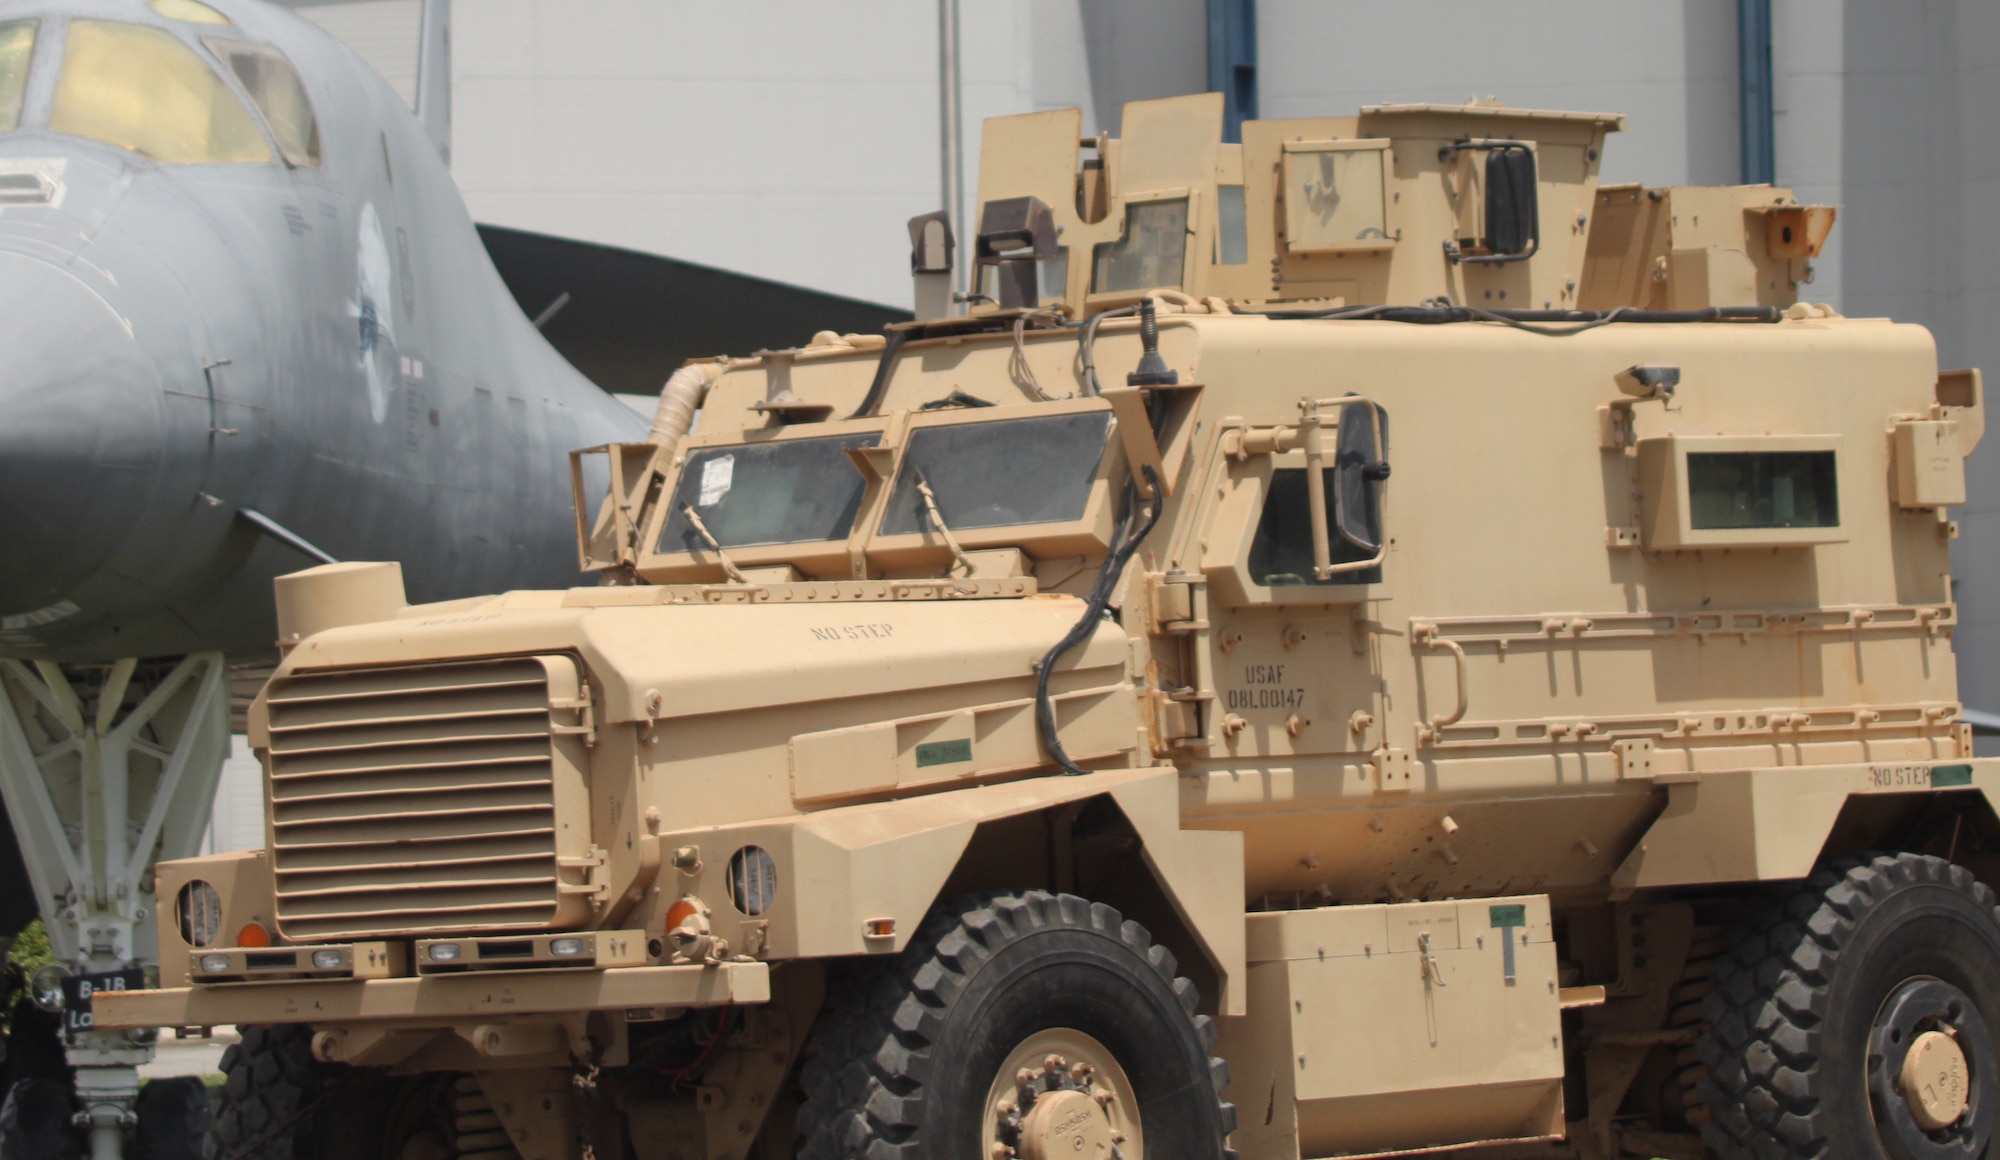 This Mine Resistant Ambush Protected Cougar is one of the newest vehicle assets at the Museum of Aviation. This particular MRAP took a bomb blast in January 2014, that caused heavy damage, yet none of the troops inside were injured. (U.S. Air Force photo by Angela Woolen)